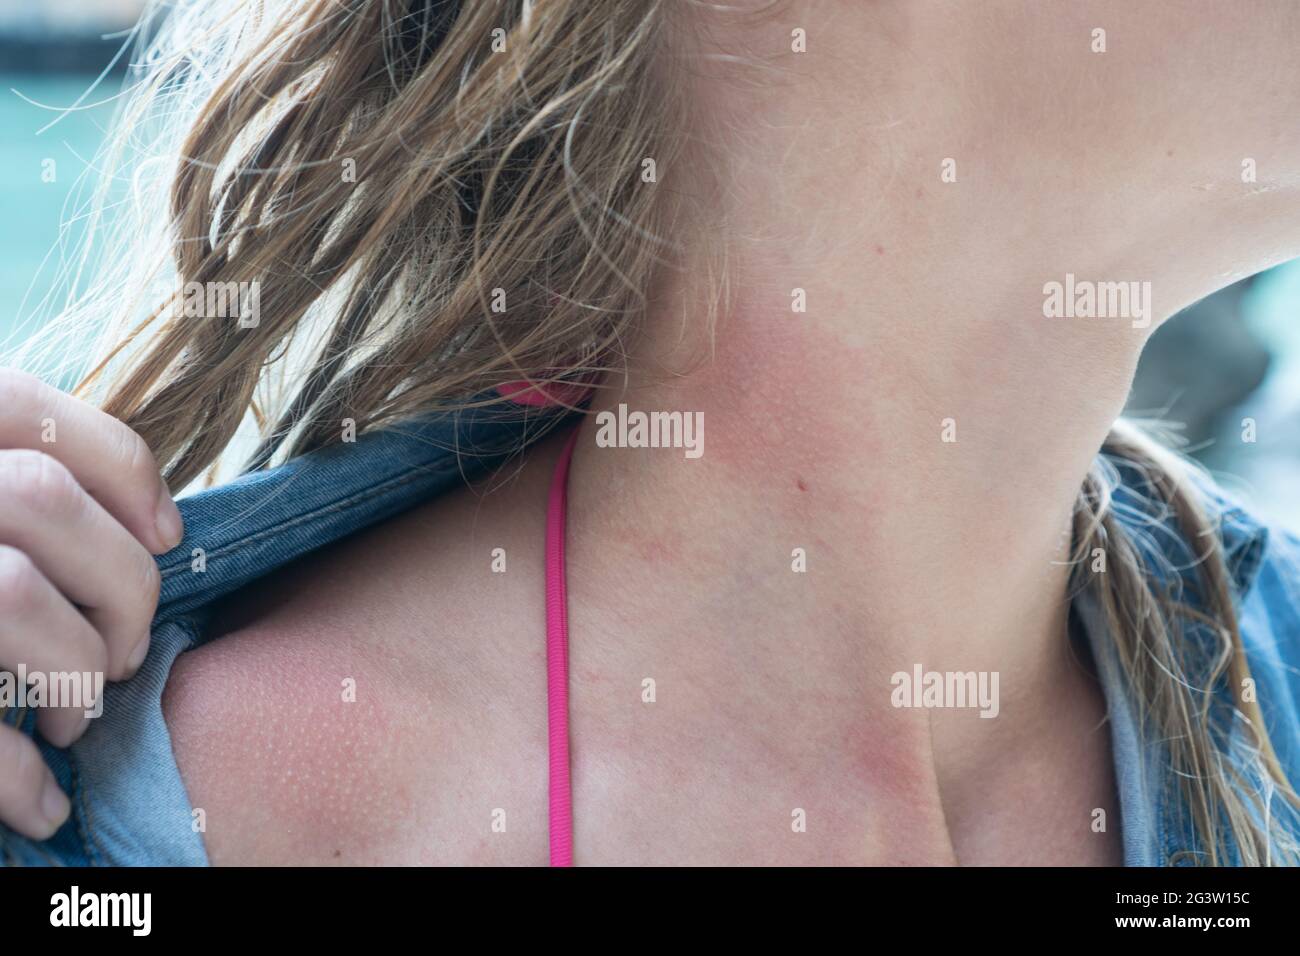 Woman's neck with jelly fish bite Stock Photo